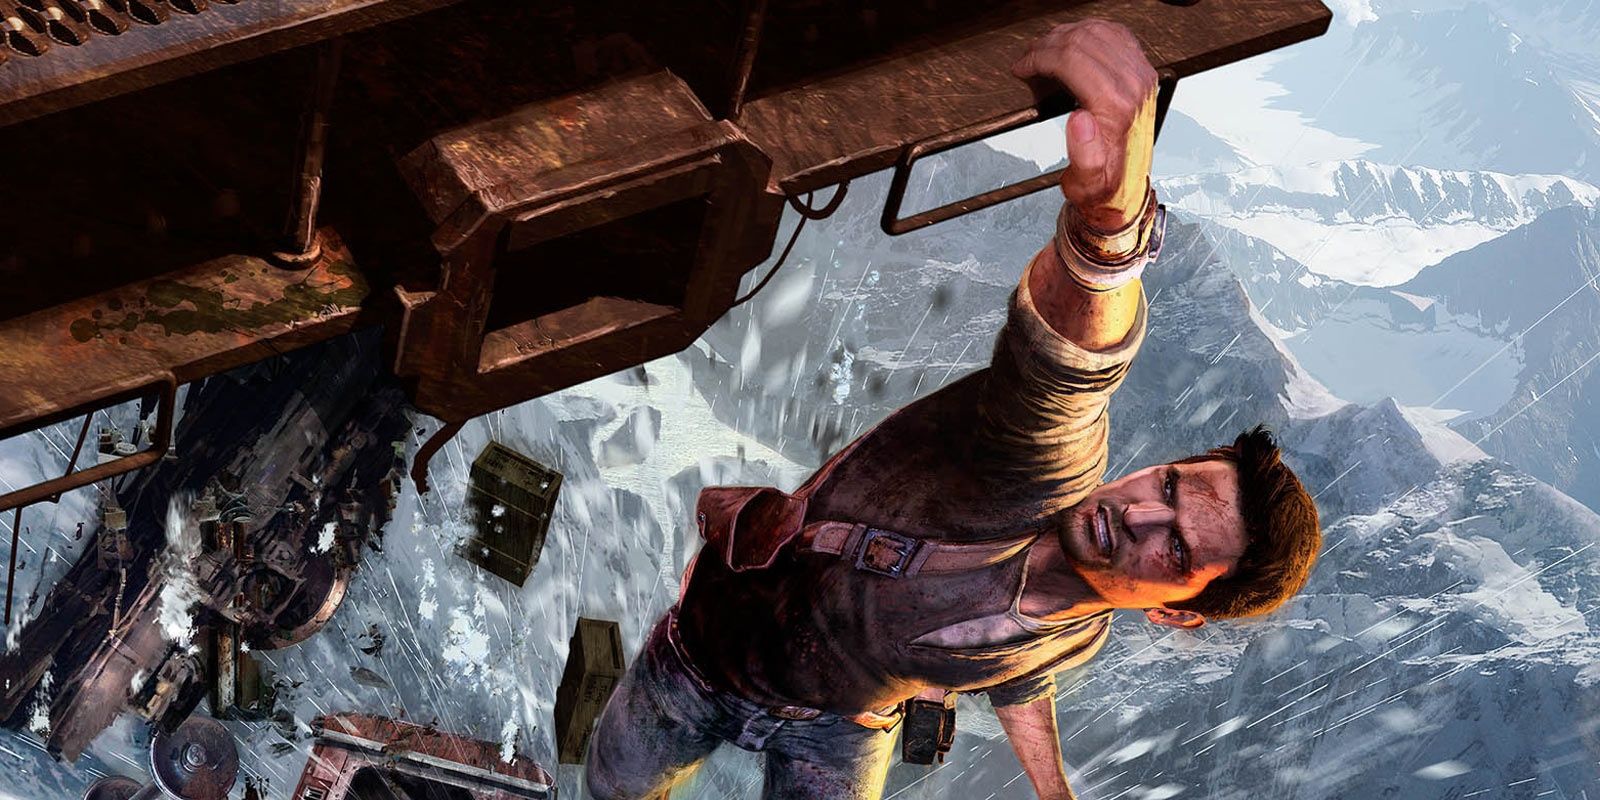 Nathan hanging in Uncharted 2 Among Thieves